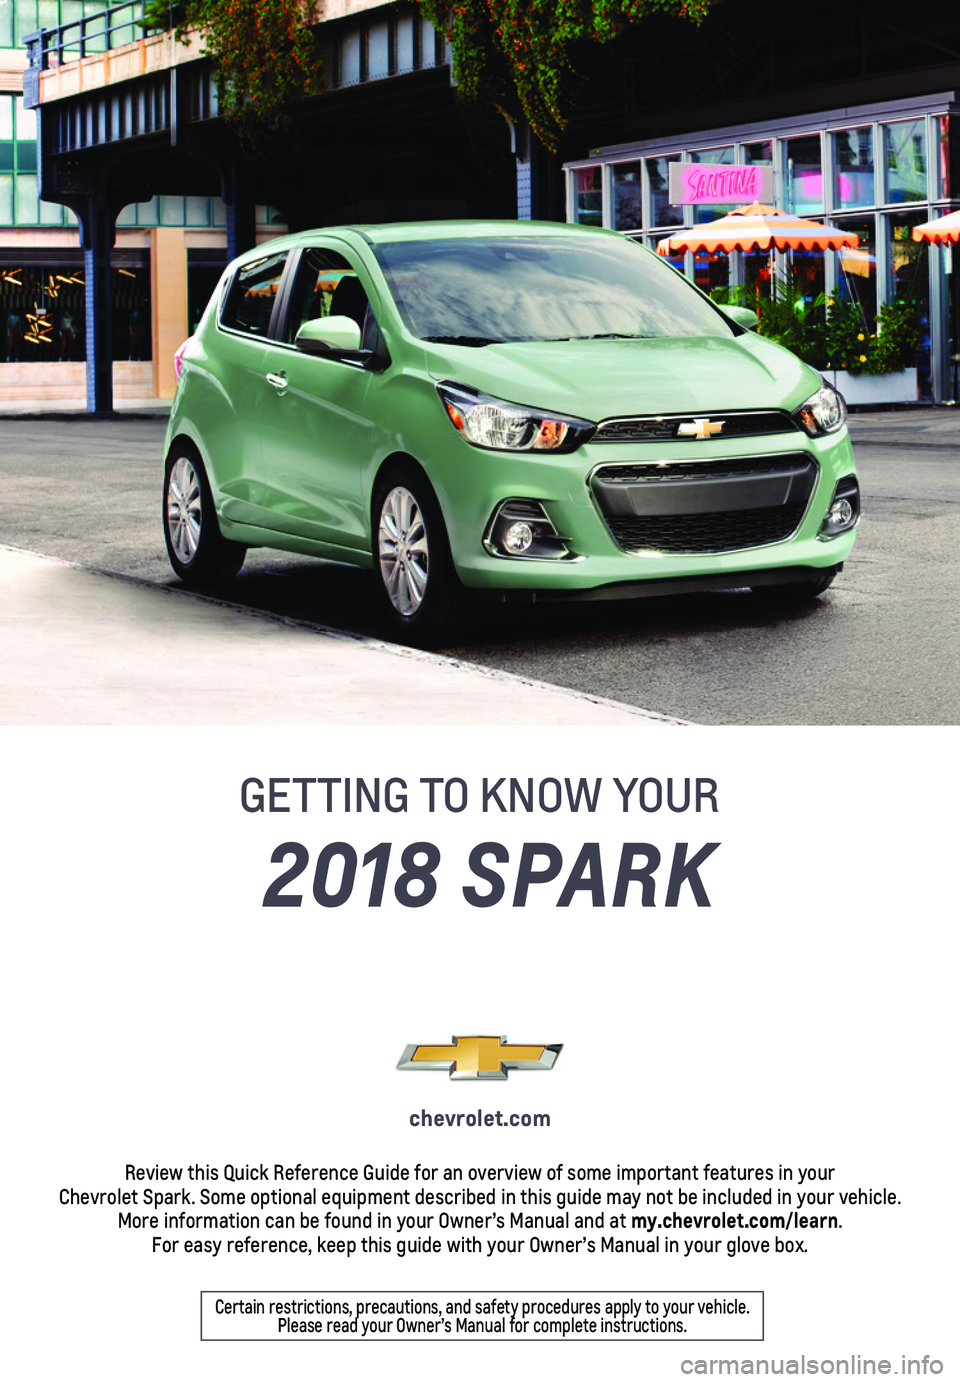 CHEVROLET SPARK 2018  Get To Know Guide 1
2018 SPARK
GETTING TO KNOW YOUR
chevrolet.com
Review this Quick Reference Guide for an overview of some important feat\
ures in your  Chevrolet Spark. Some optional equipment described in this guide